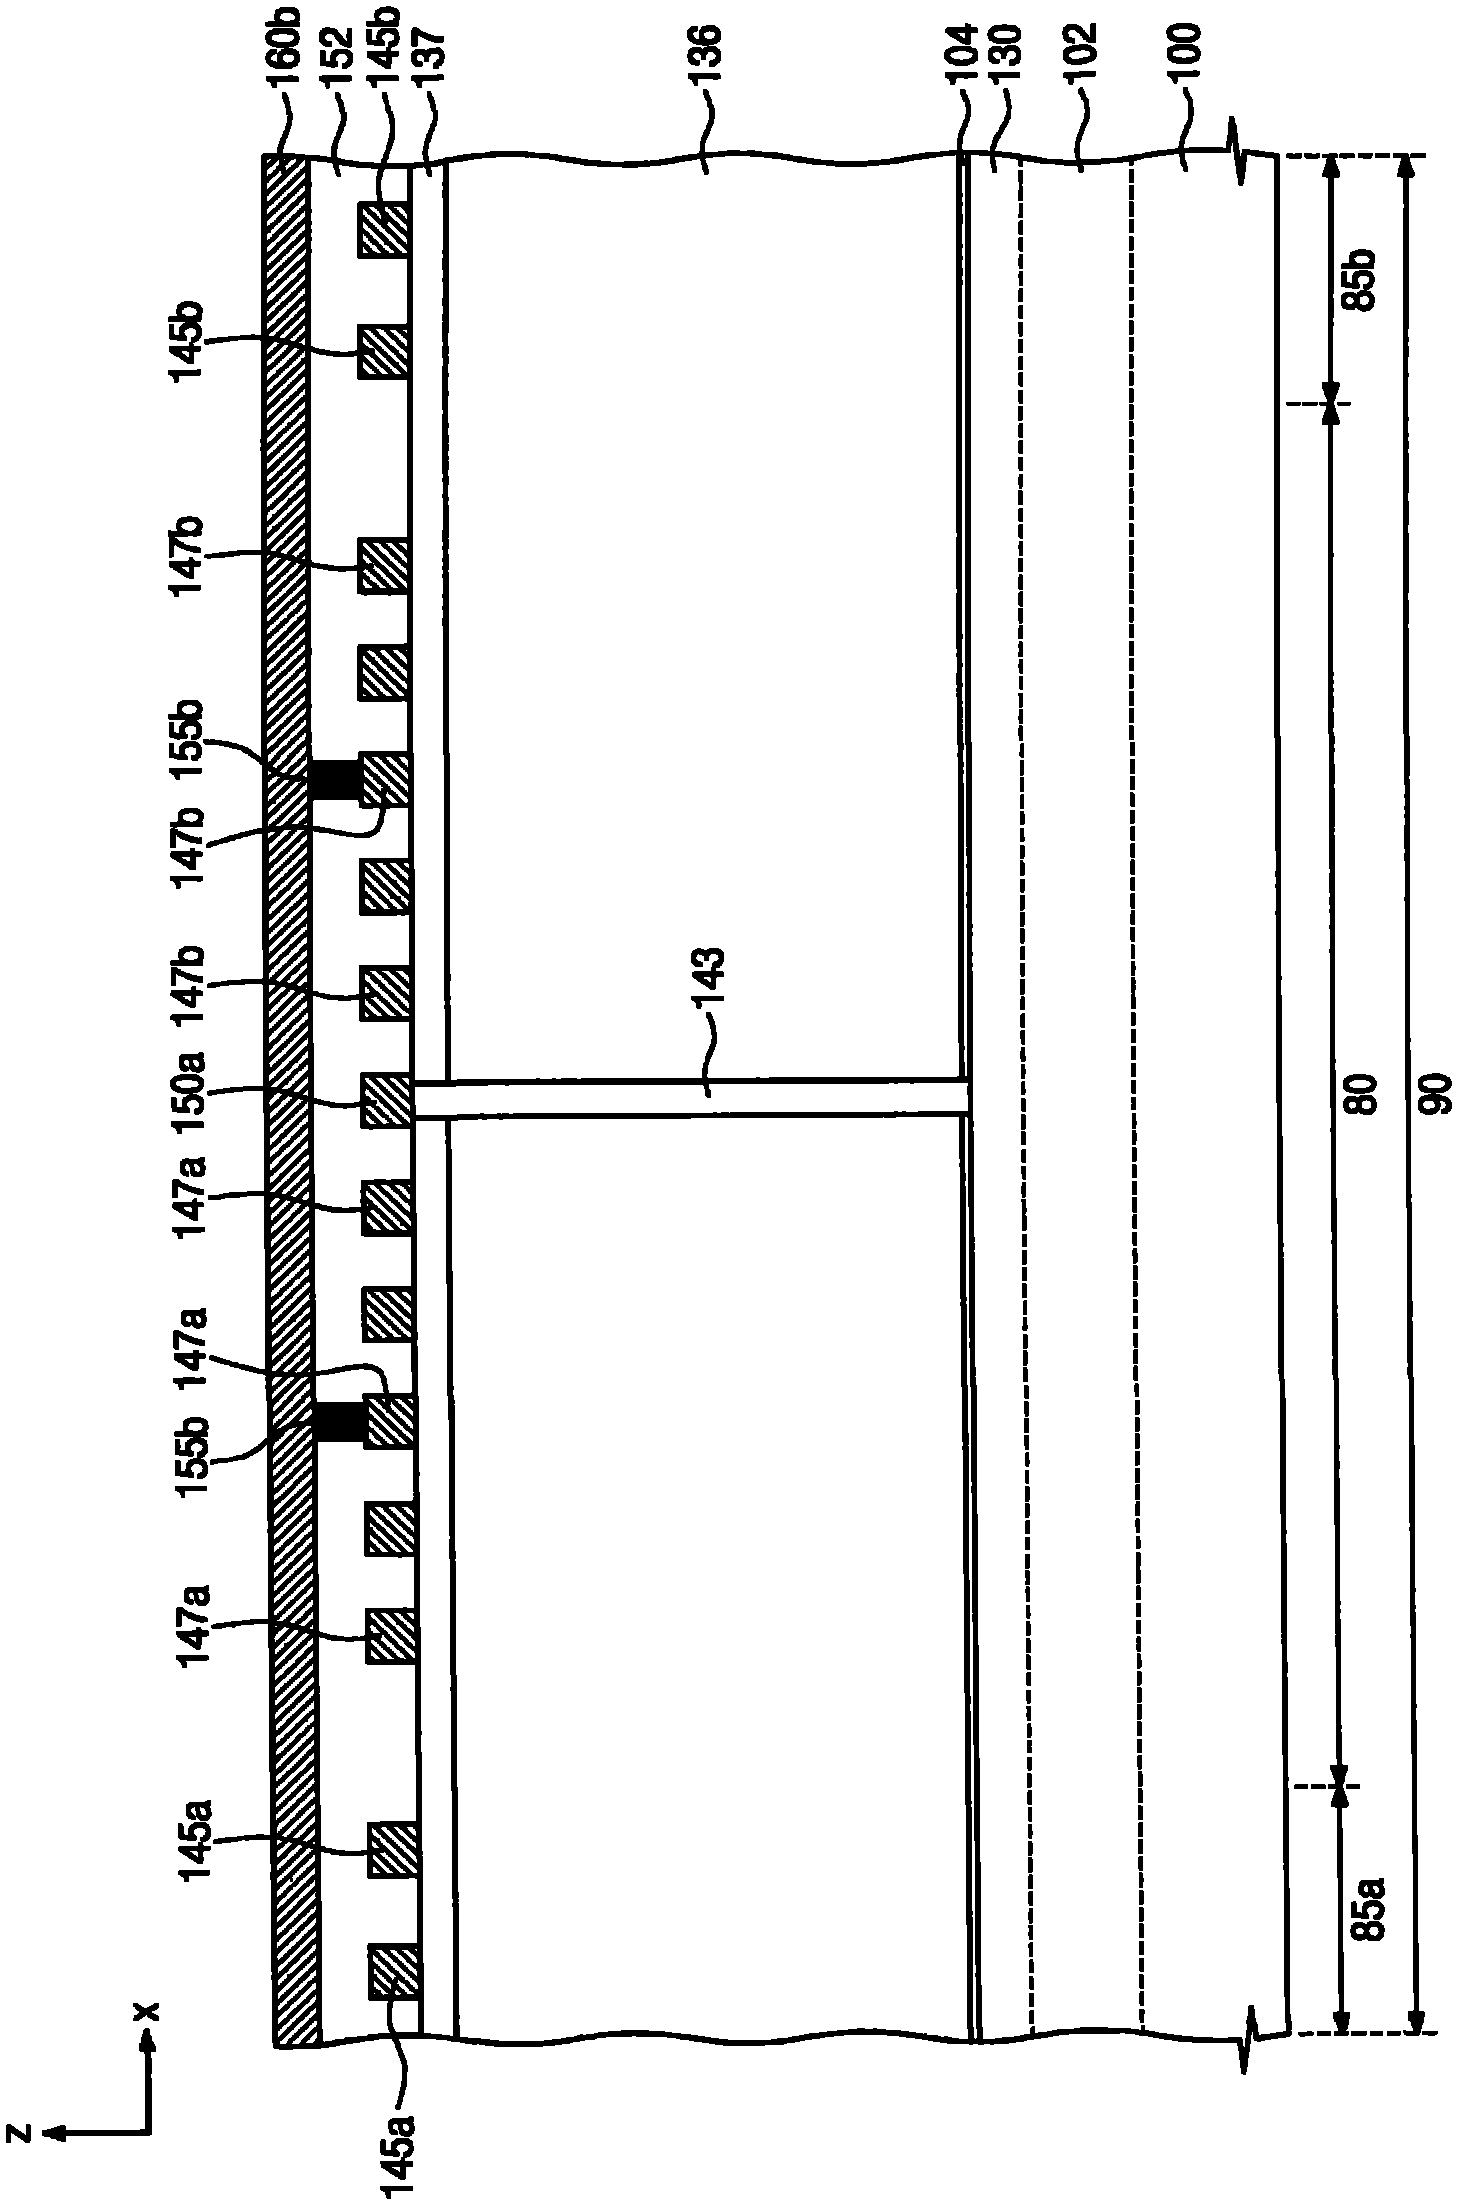 Three-dimensional semiconductor memory device